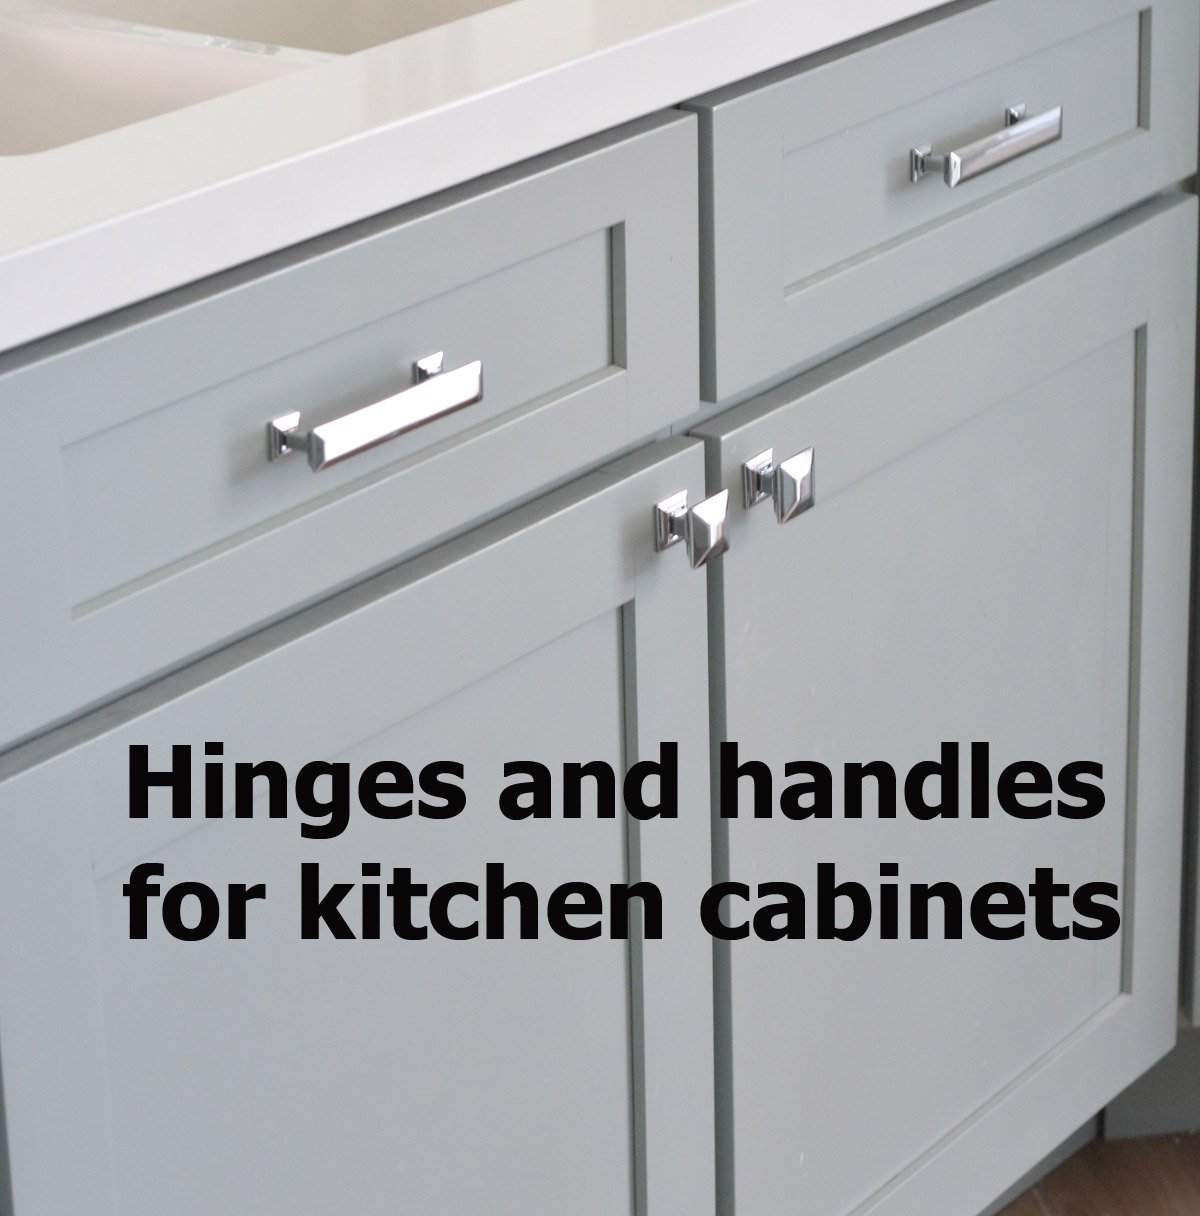 Hinges and handles for cabinets